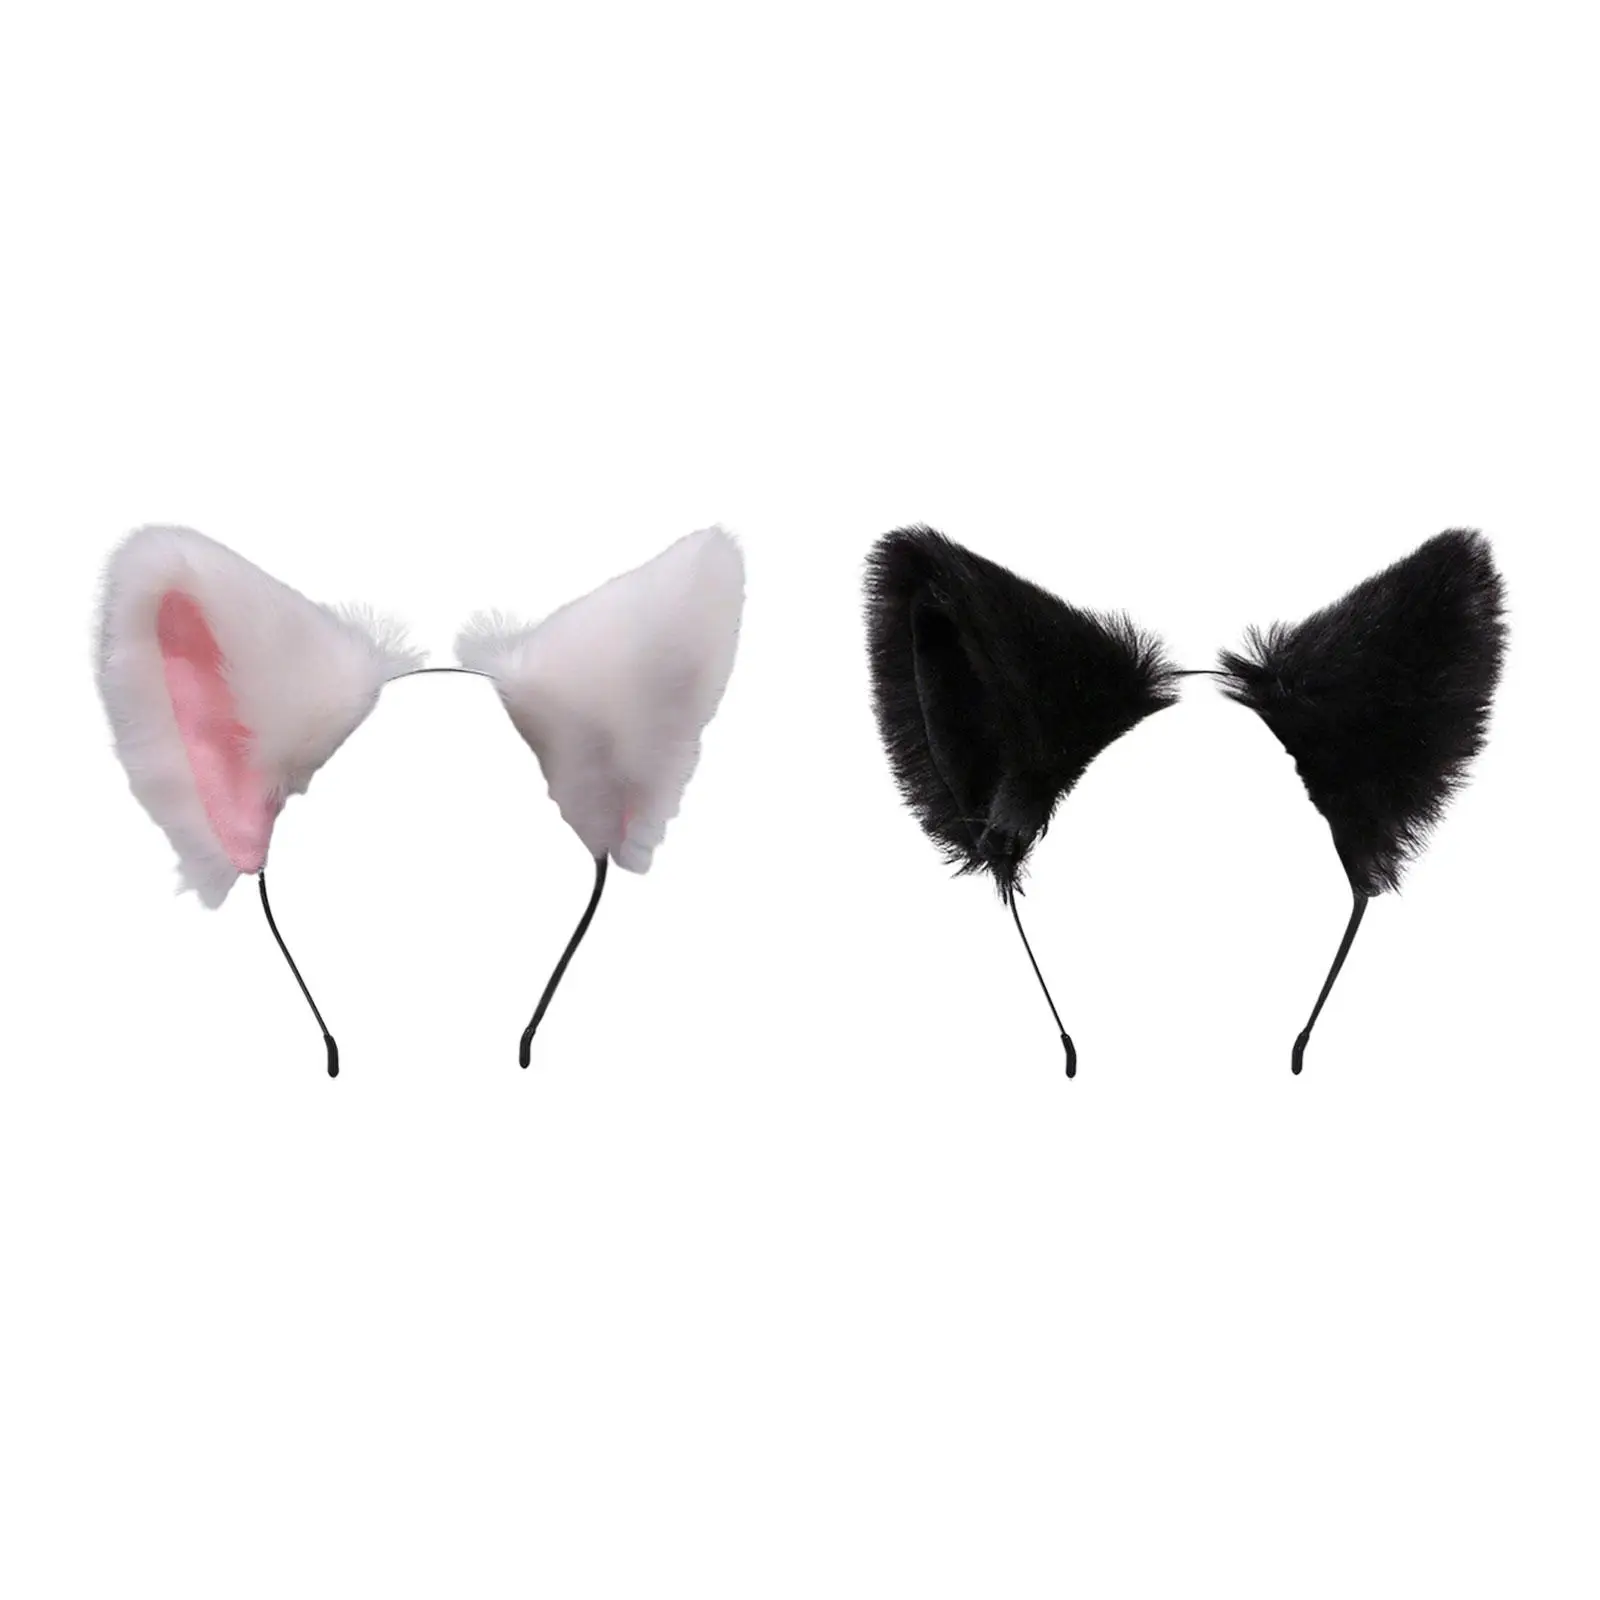 

Ear Headbands Adorable Cosplay Party Accessories Ears Hair Headwear for Festivals Masquerade Themed Parties New Year Holiday